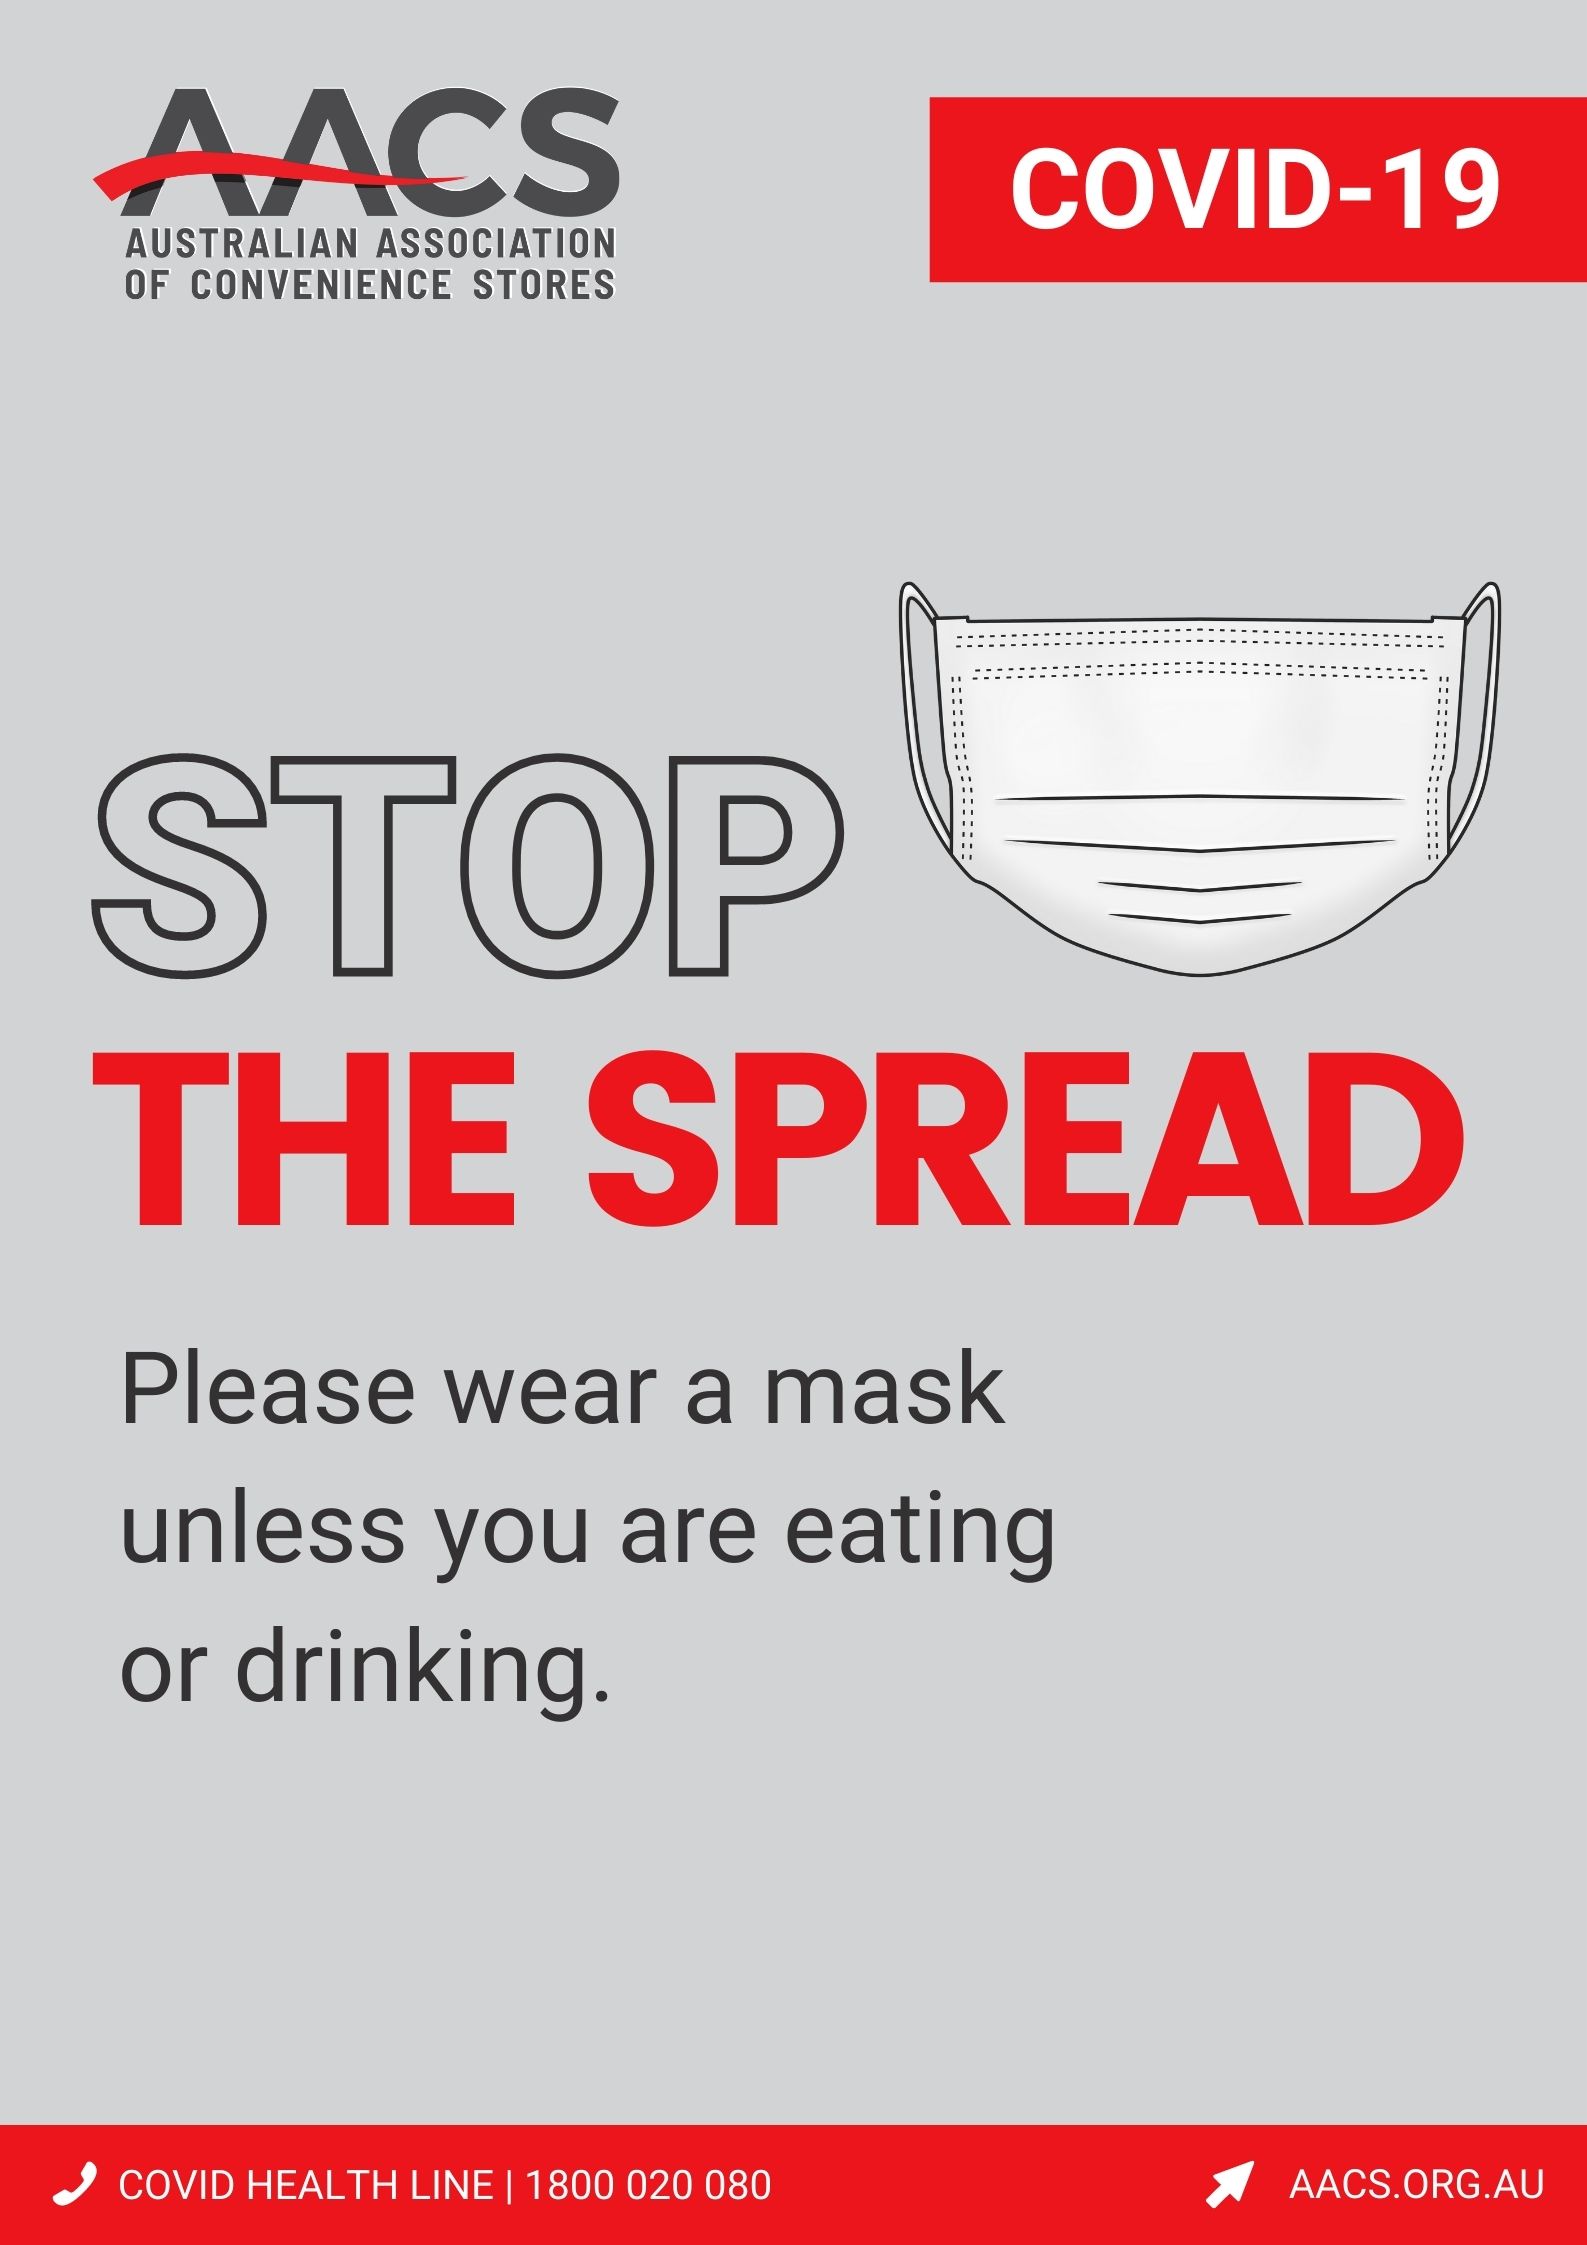 AACS_COVID-19 posters_Wear Mask Unless Eating or Drinking